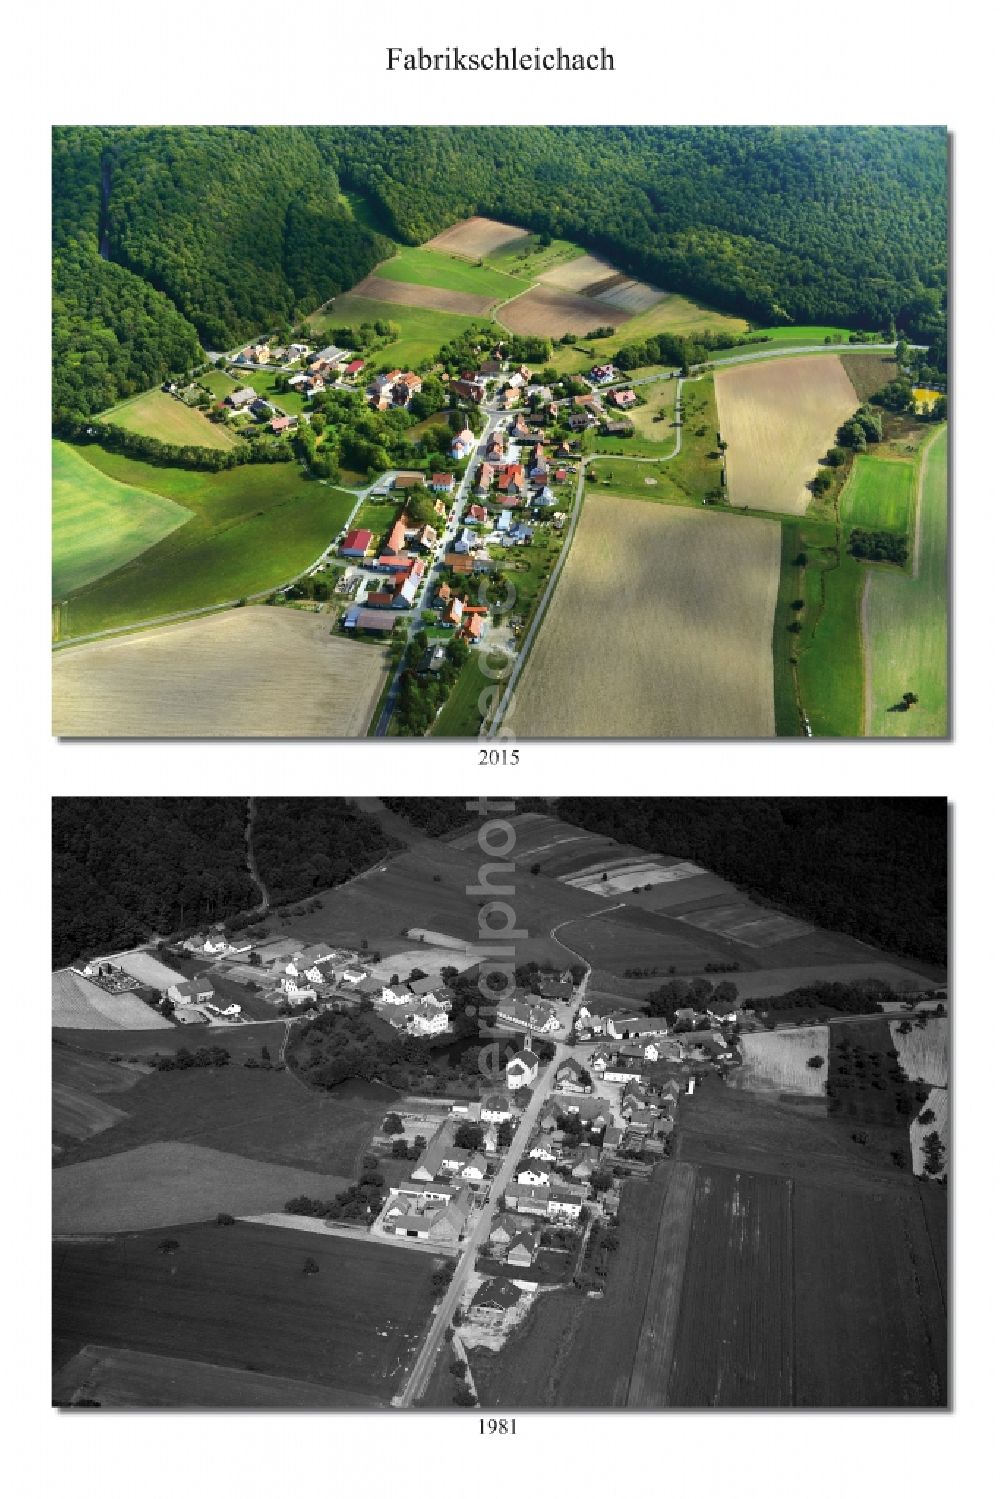 Aerial image Fabrikschleichnach - 1981 and 2015 village - view change of the district of Hassberge belonging municipality in Fabrikschleichnach in the state Bavaria